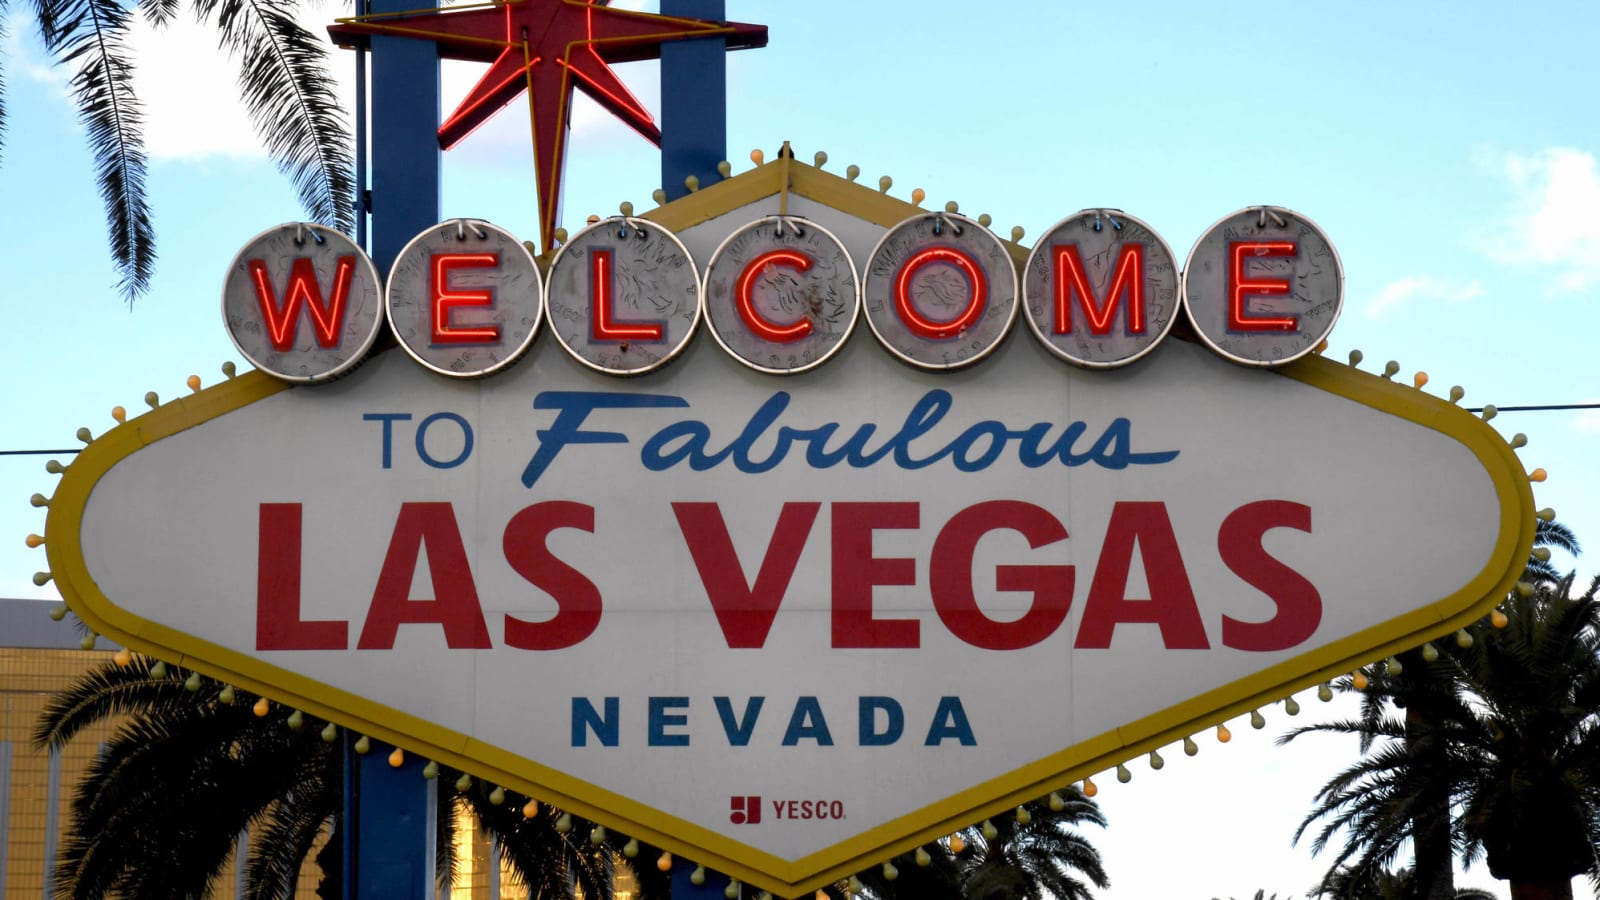 Athletics casing out Las Vegas for potential relocation?